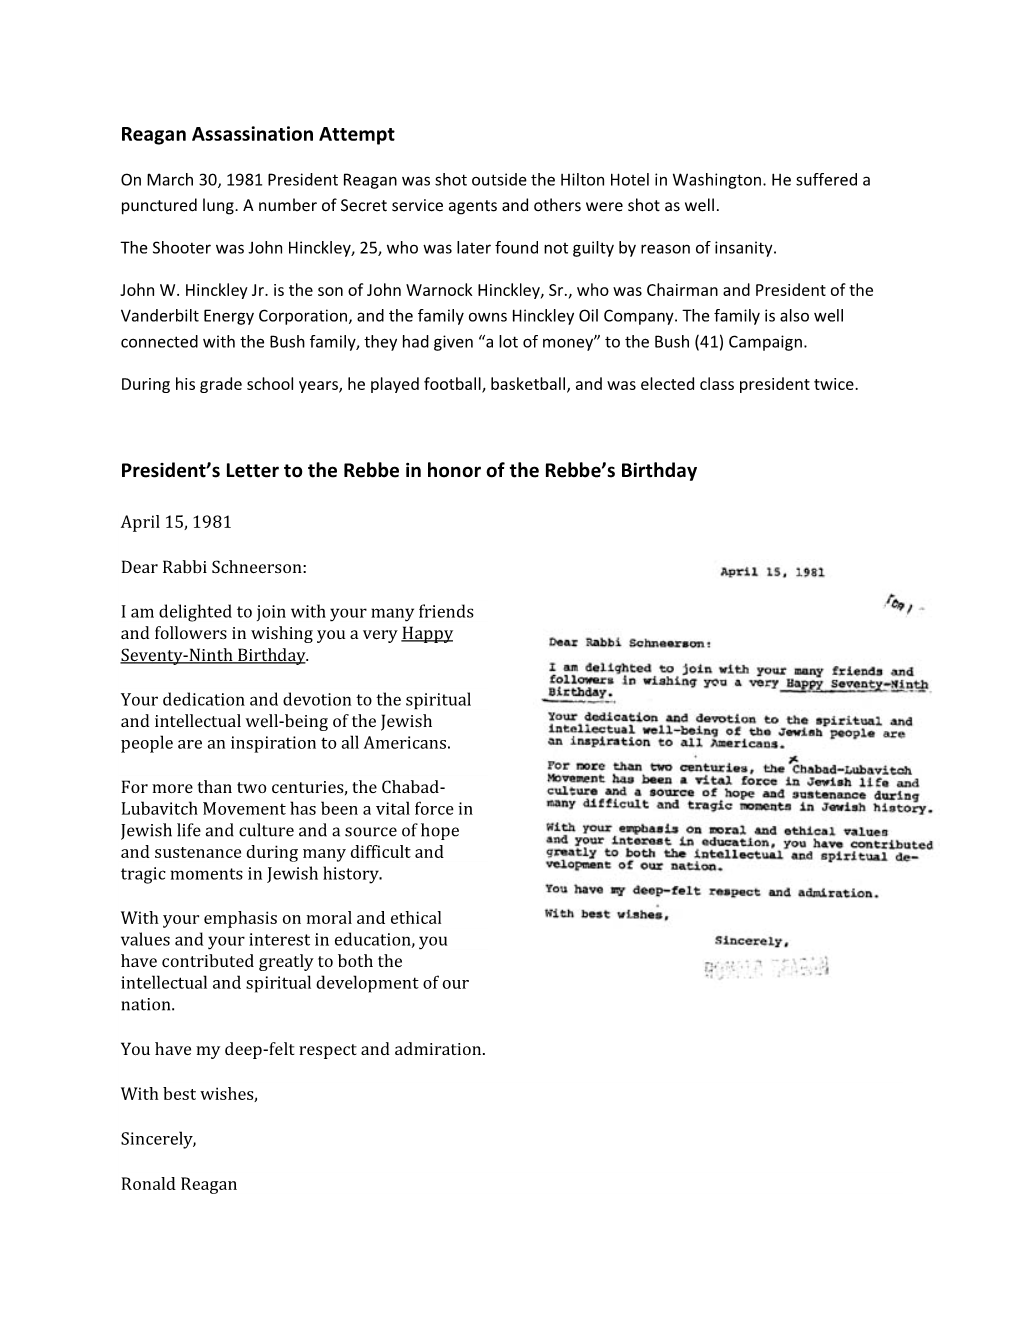 Reagan Assassination Attempt President's Letter to the Rebbe in Honor of the Rebbe's Birthday